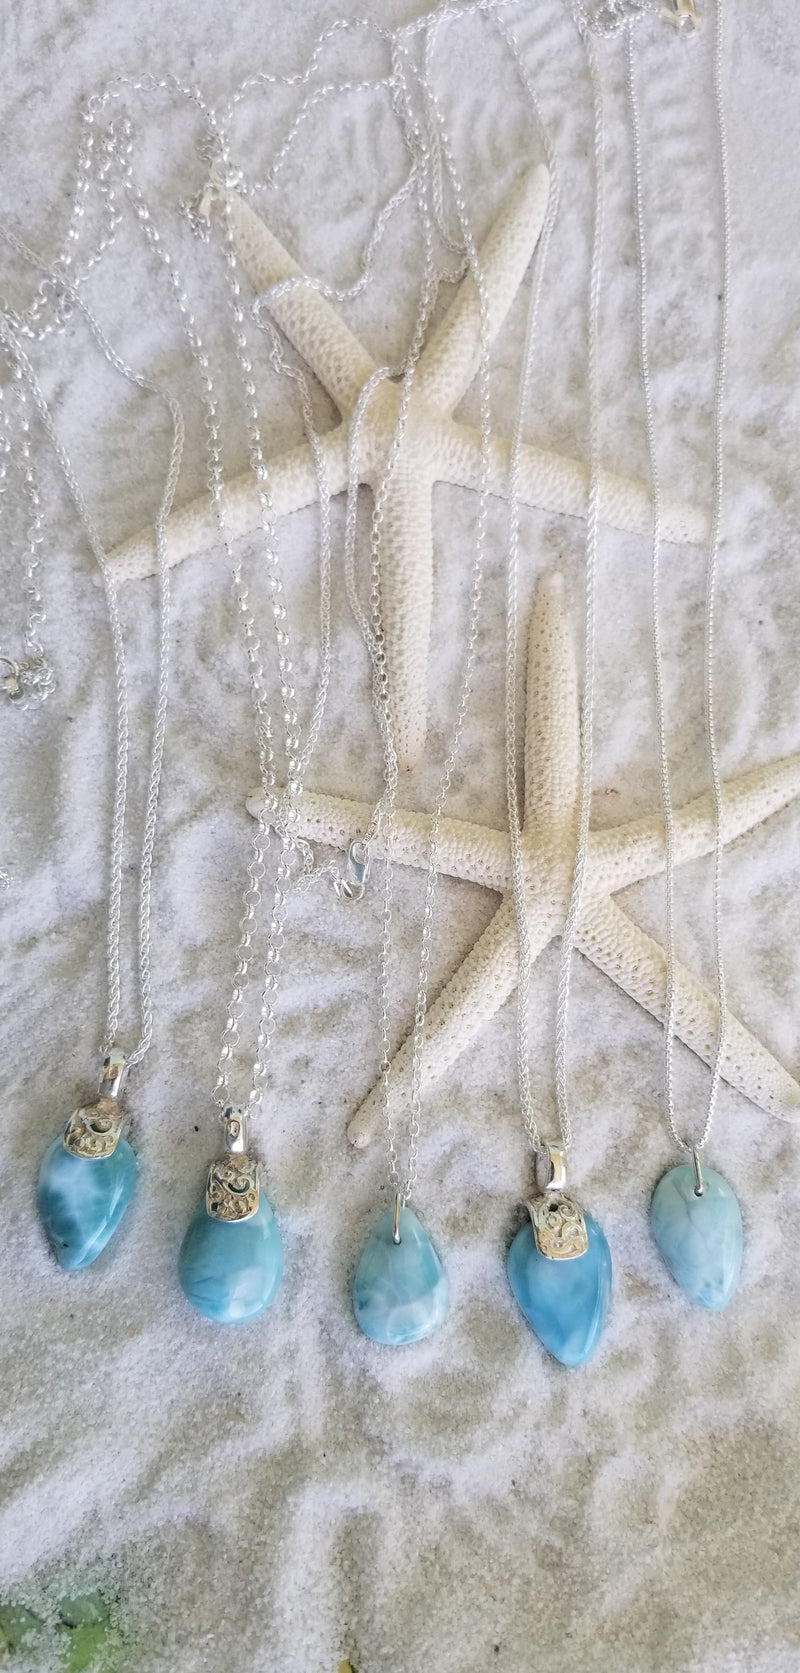 Larimar and Sterling Silver Filigree Med.Organic shape Pendant (5) with Italian Sterling Silver Chain - LarimarOcean  